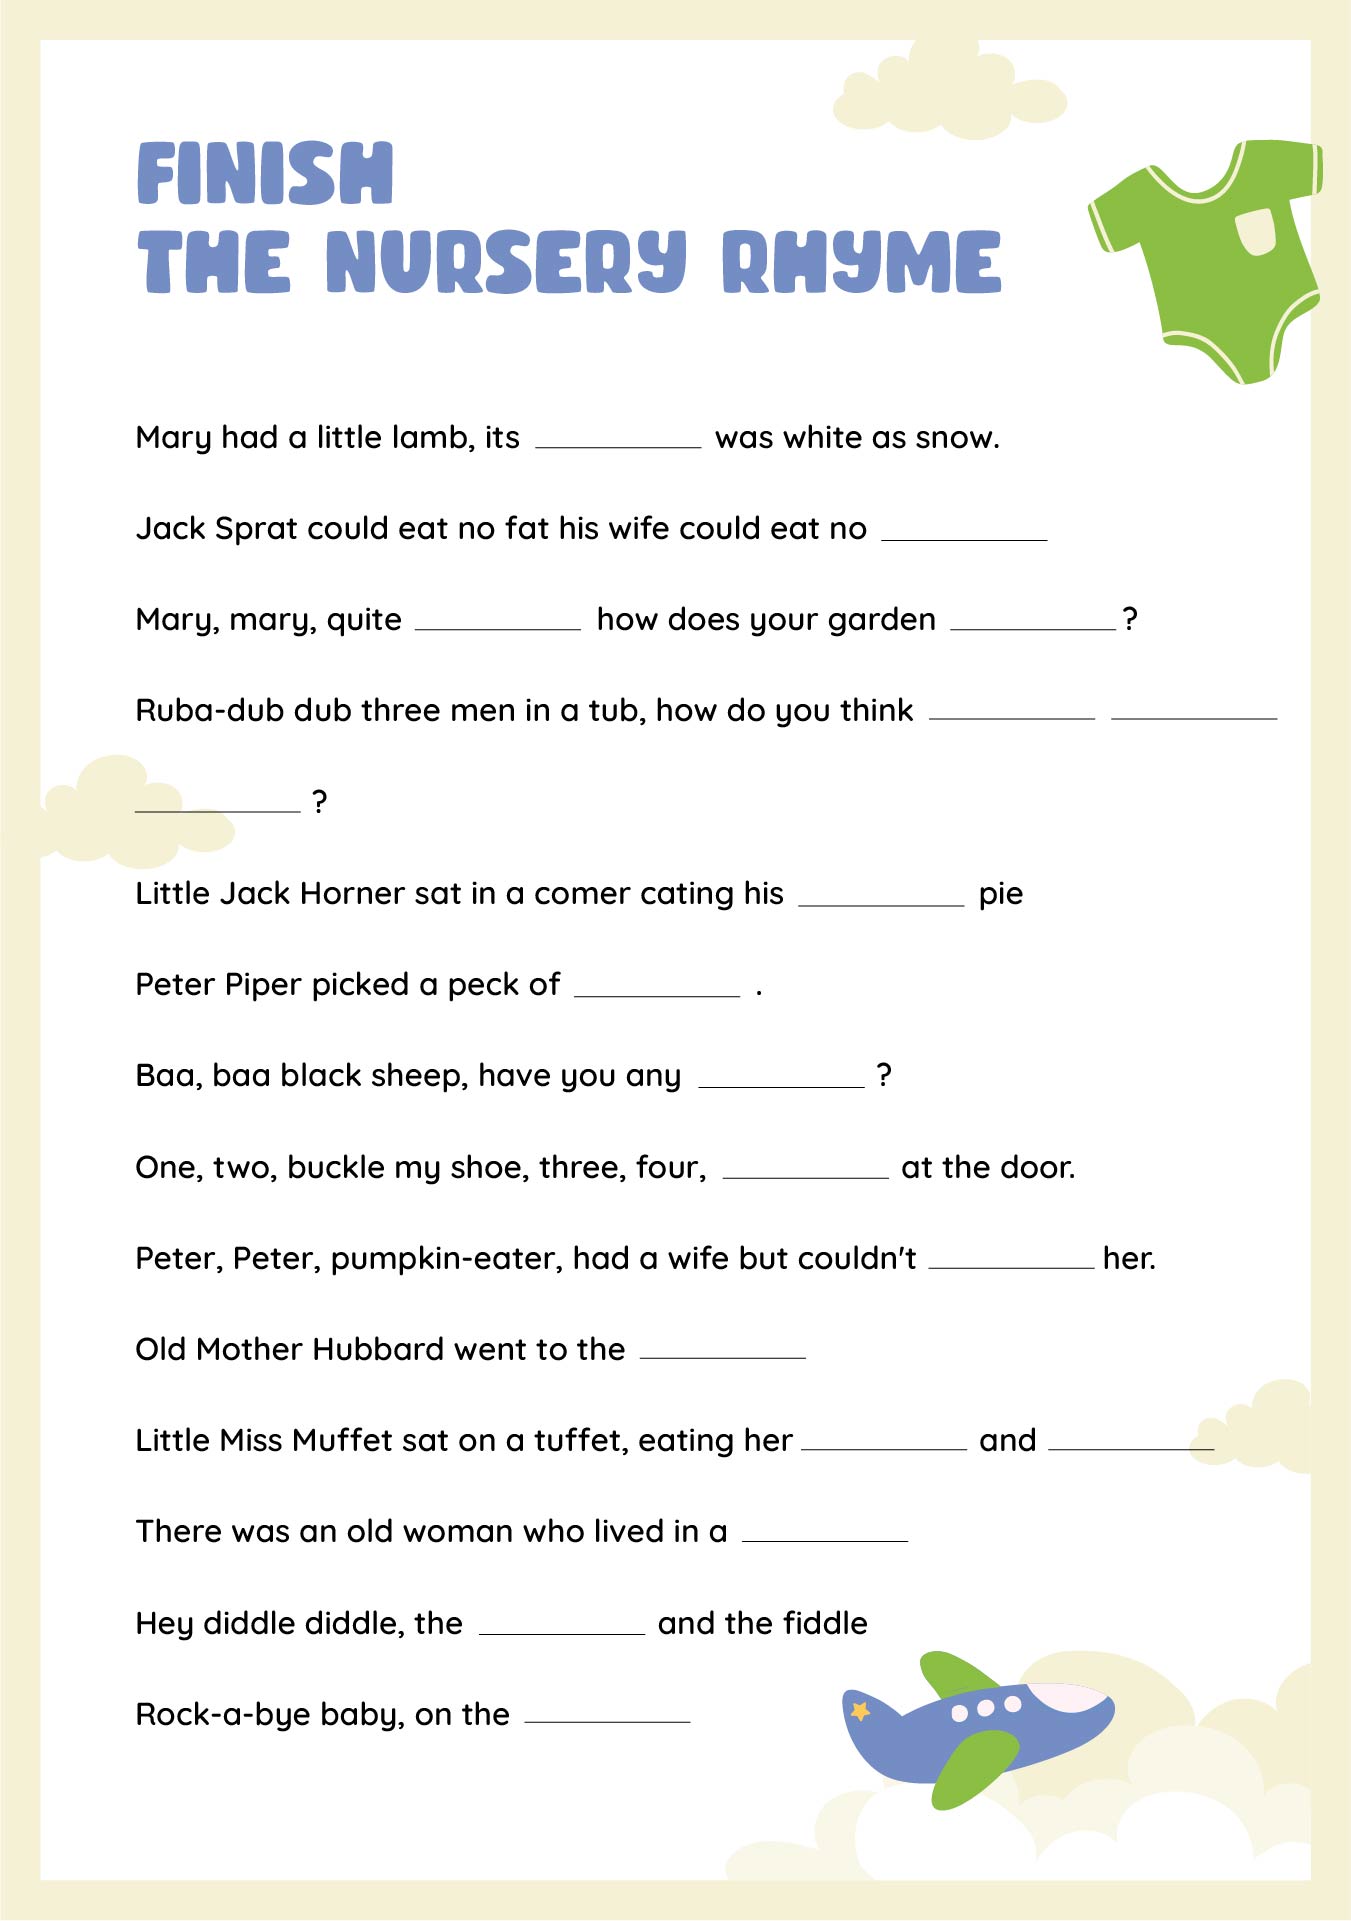 Baby Shower Game Finish The Nursery Rhyme Printable